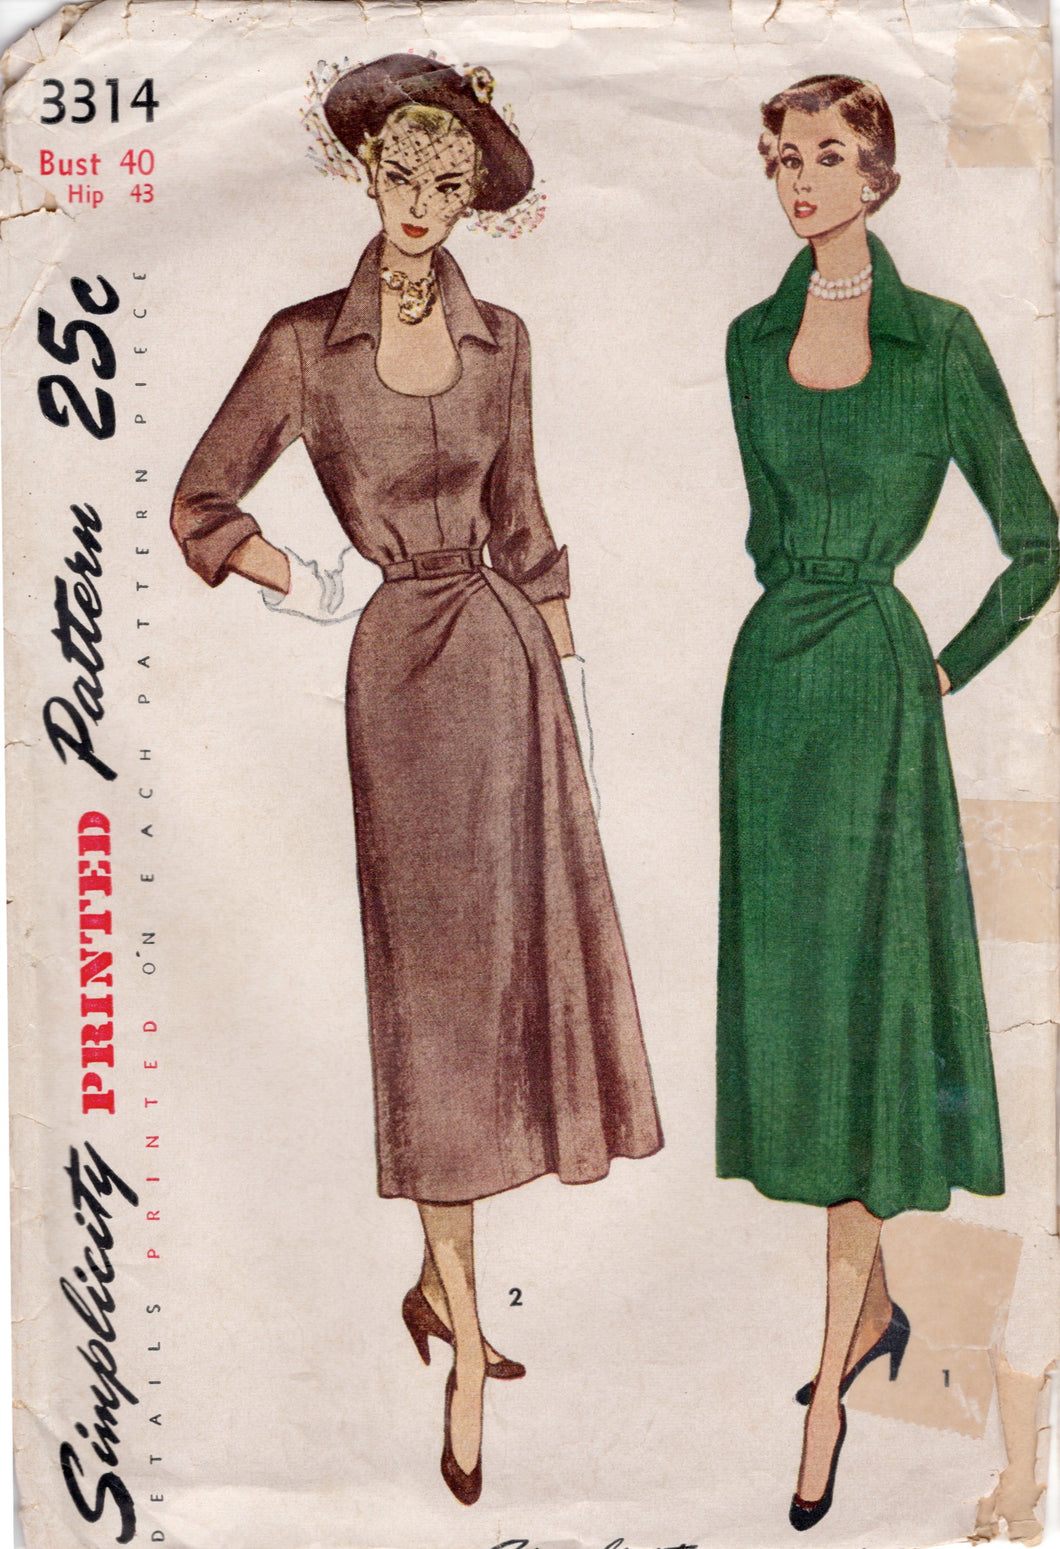 1950’s Simplicity One Piece Scoop Neckline Dress Pattern with Side Drape and Collar - Bust 40